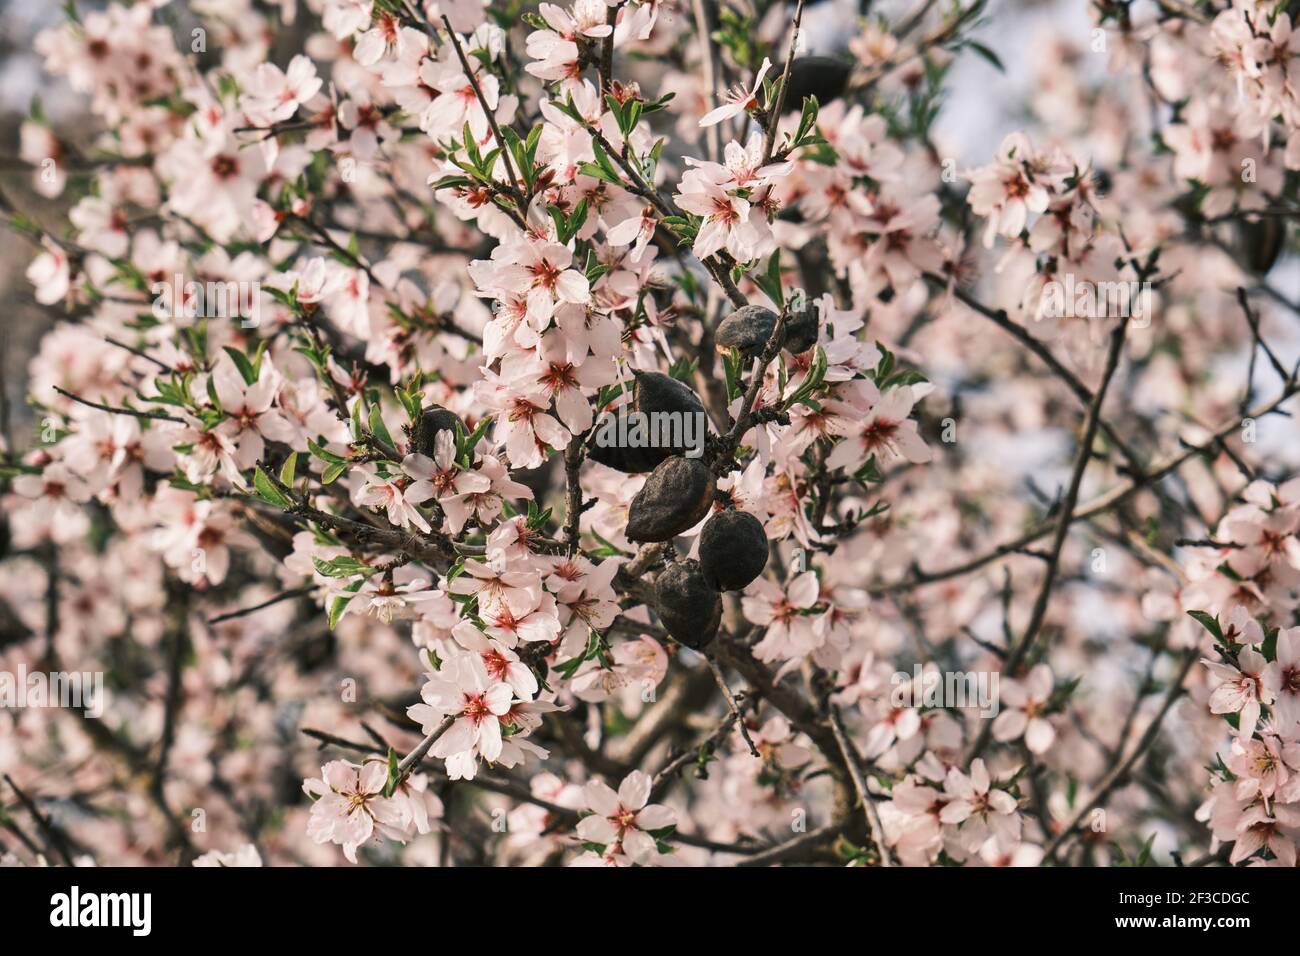 Detail of blossoming prunus dulcis pink flowers and drupes Stock Photo